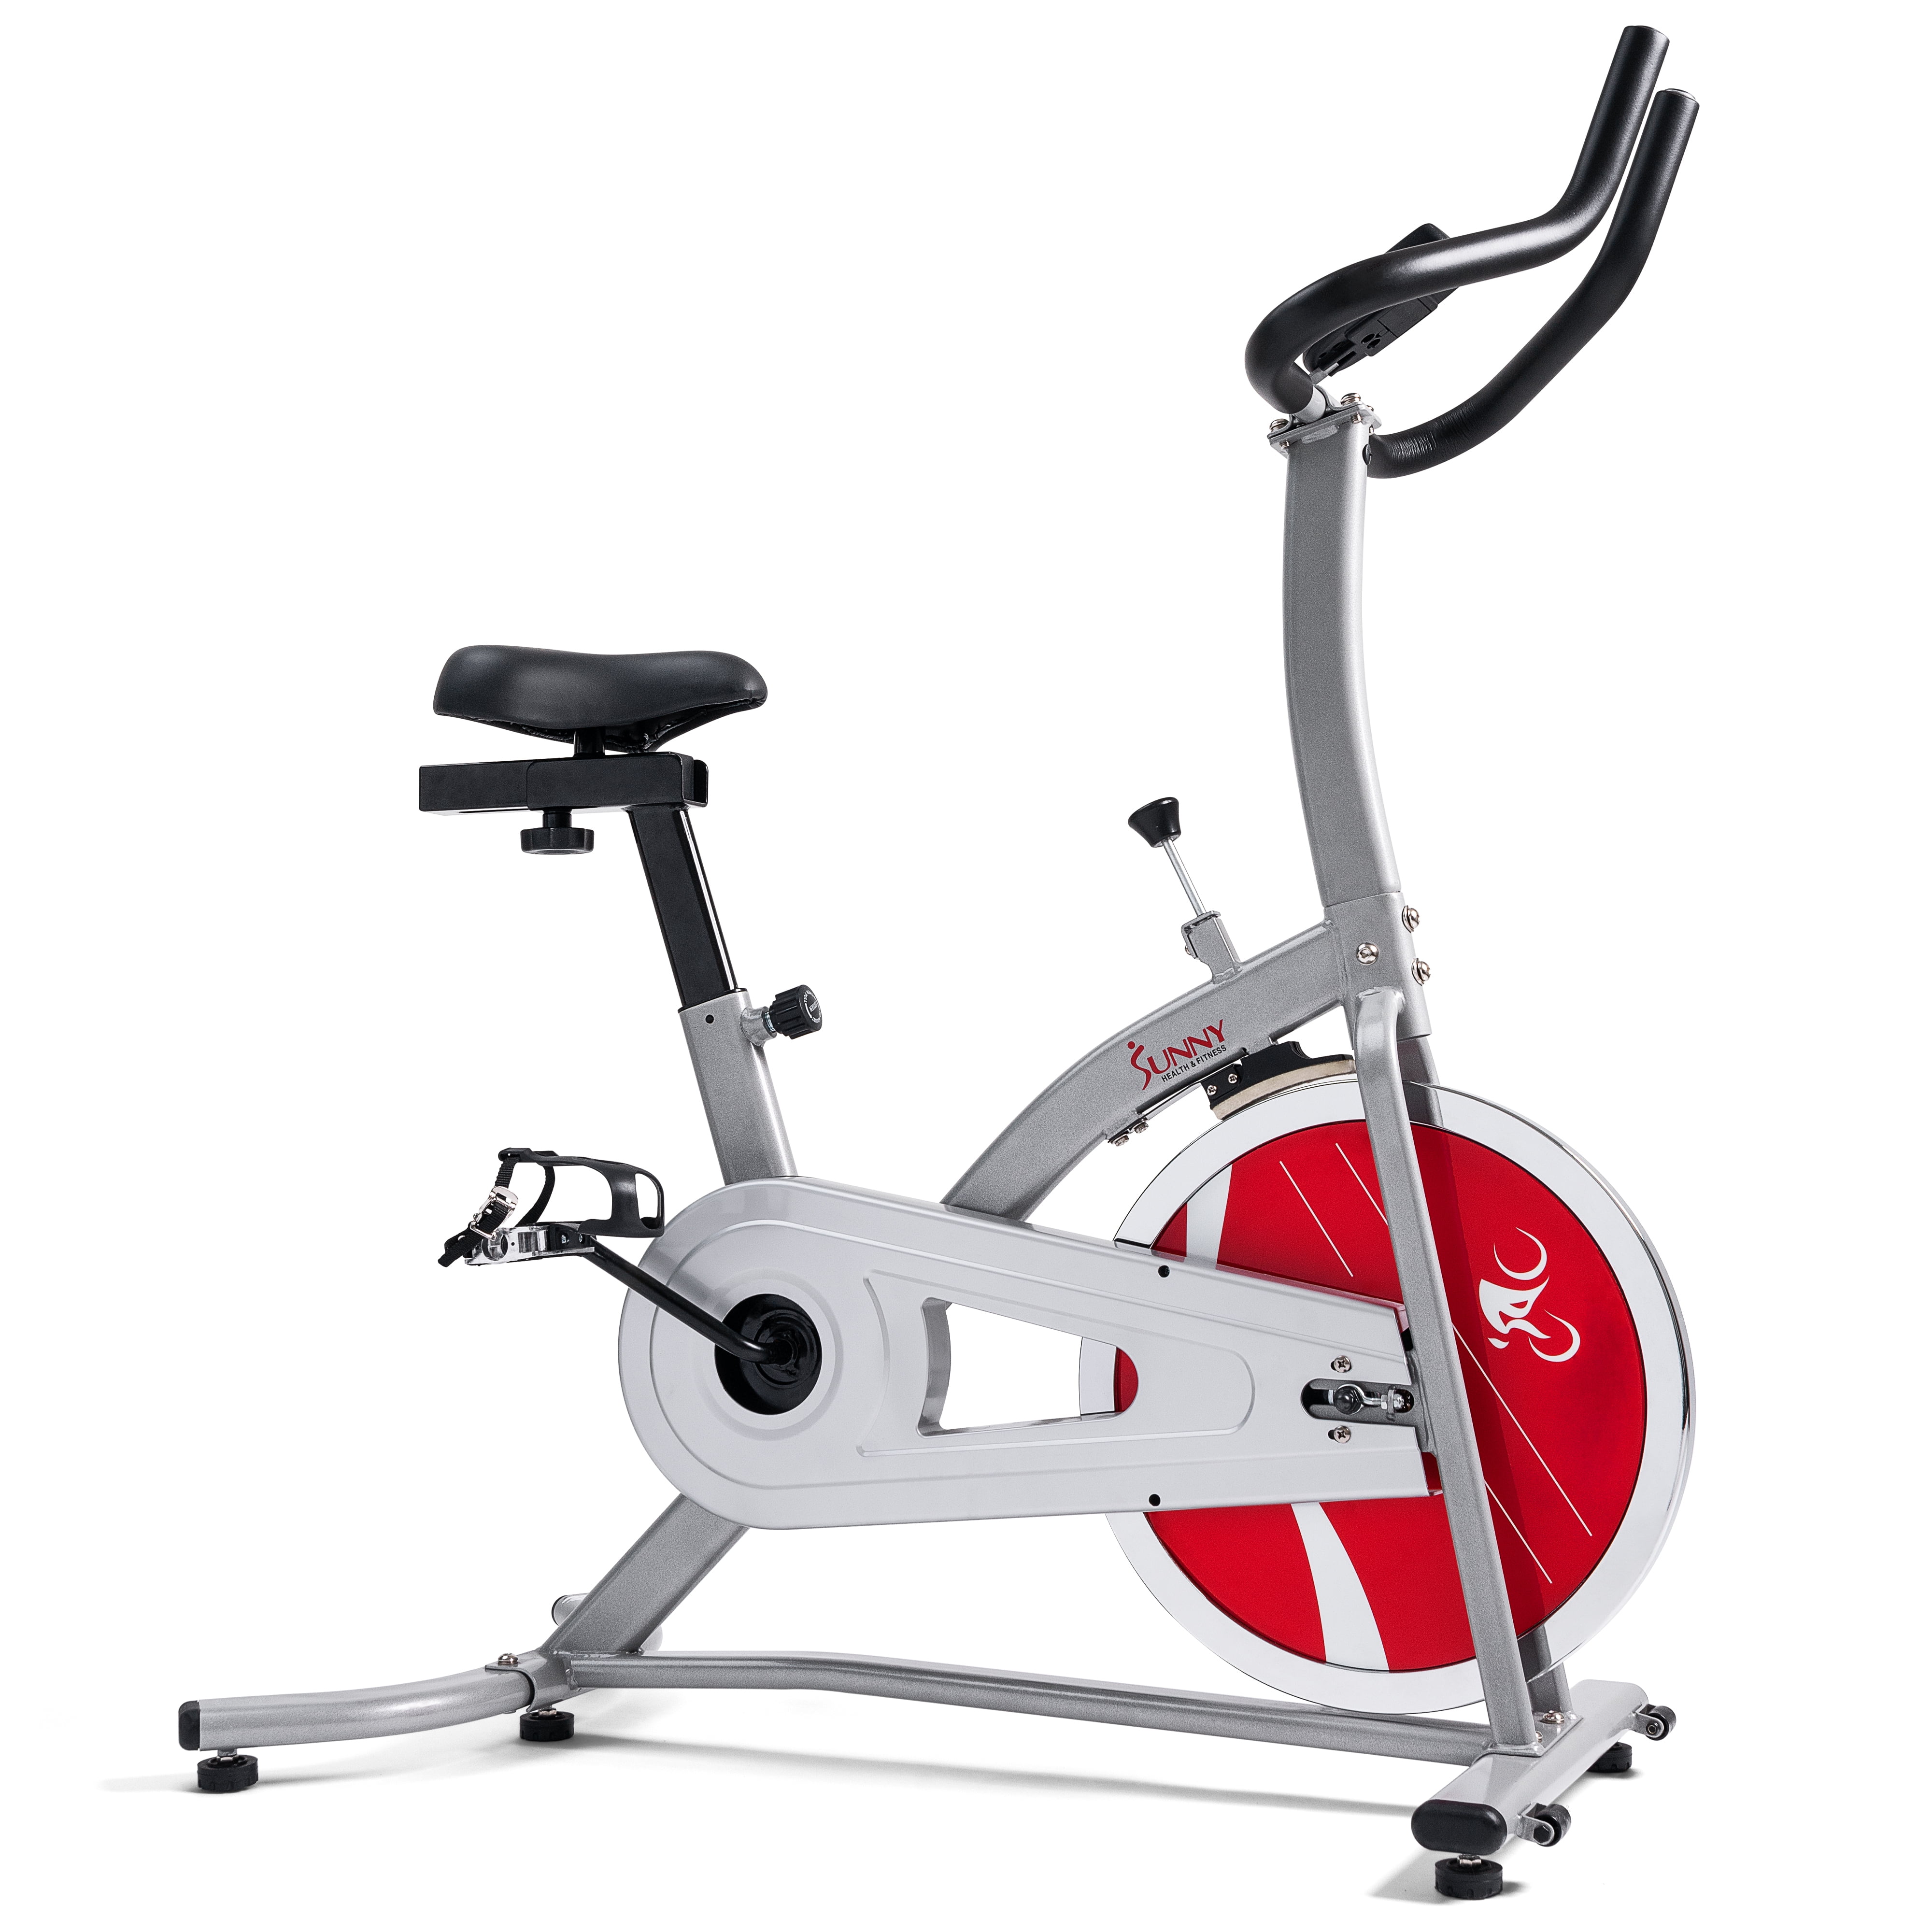 Digital Exercise Bike Indoor Bicycle Cycling Cardio Fitness Training Lossweight 